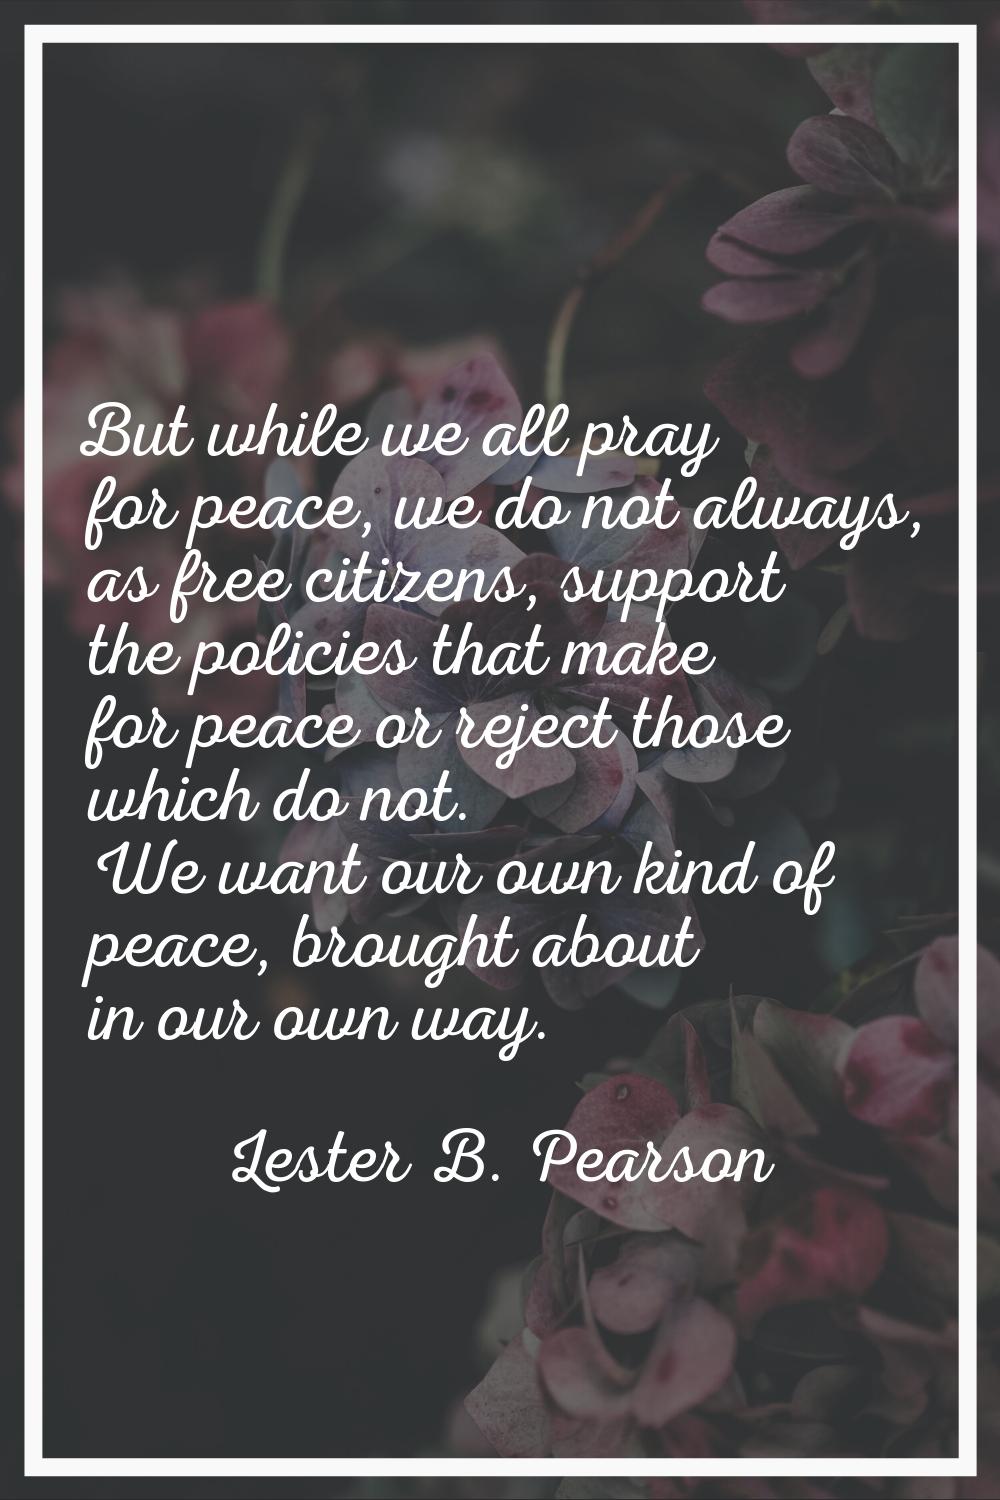 But while we all pray for peace, we do not always, as free citizens, support the policies that make